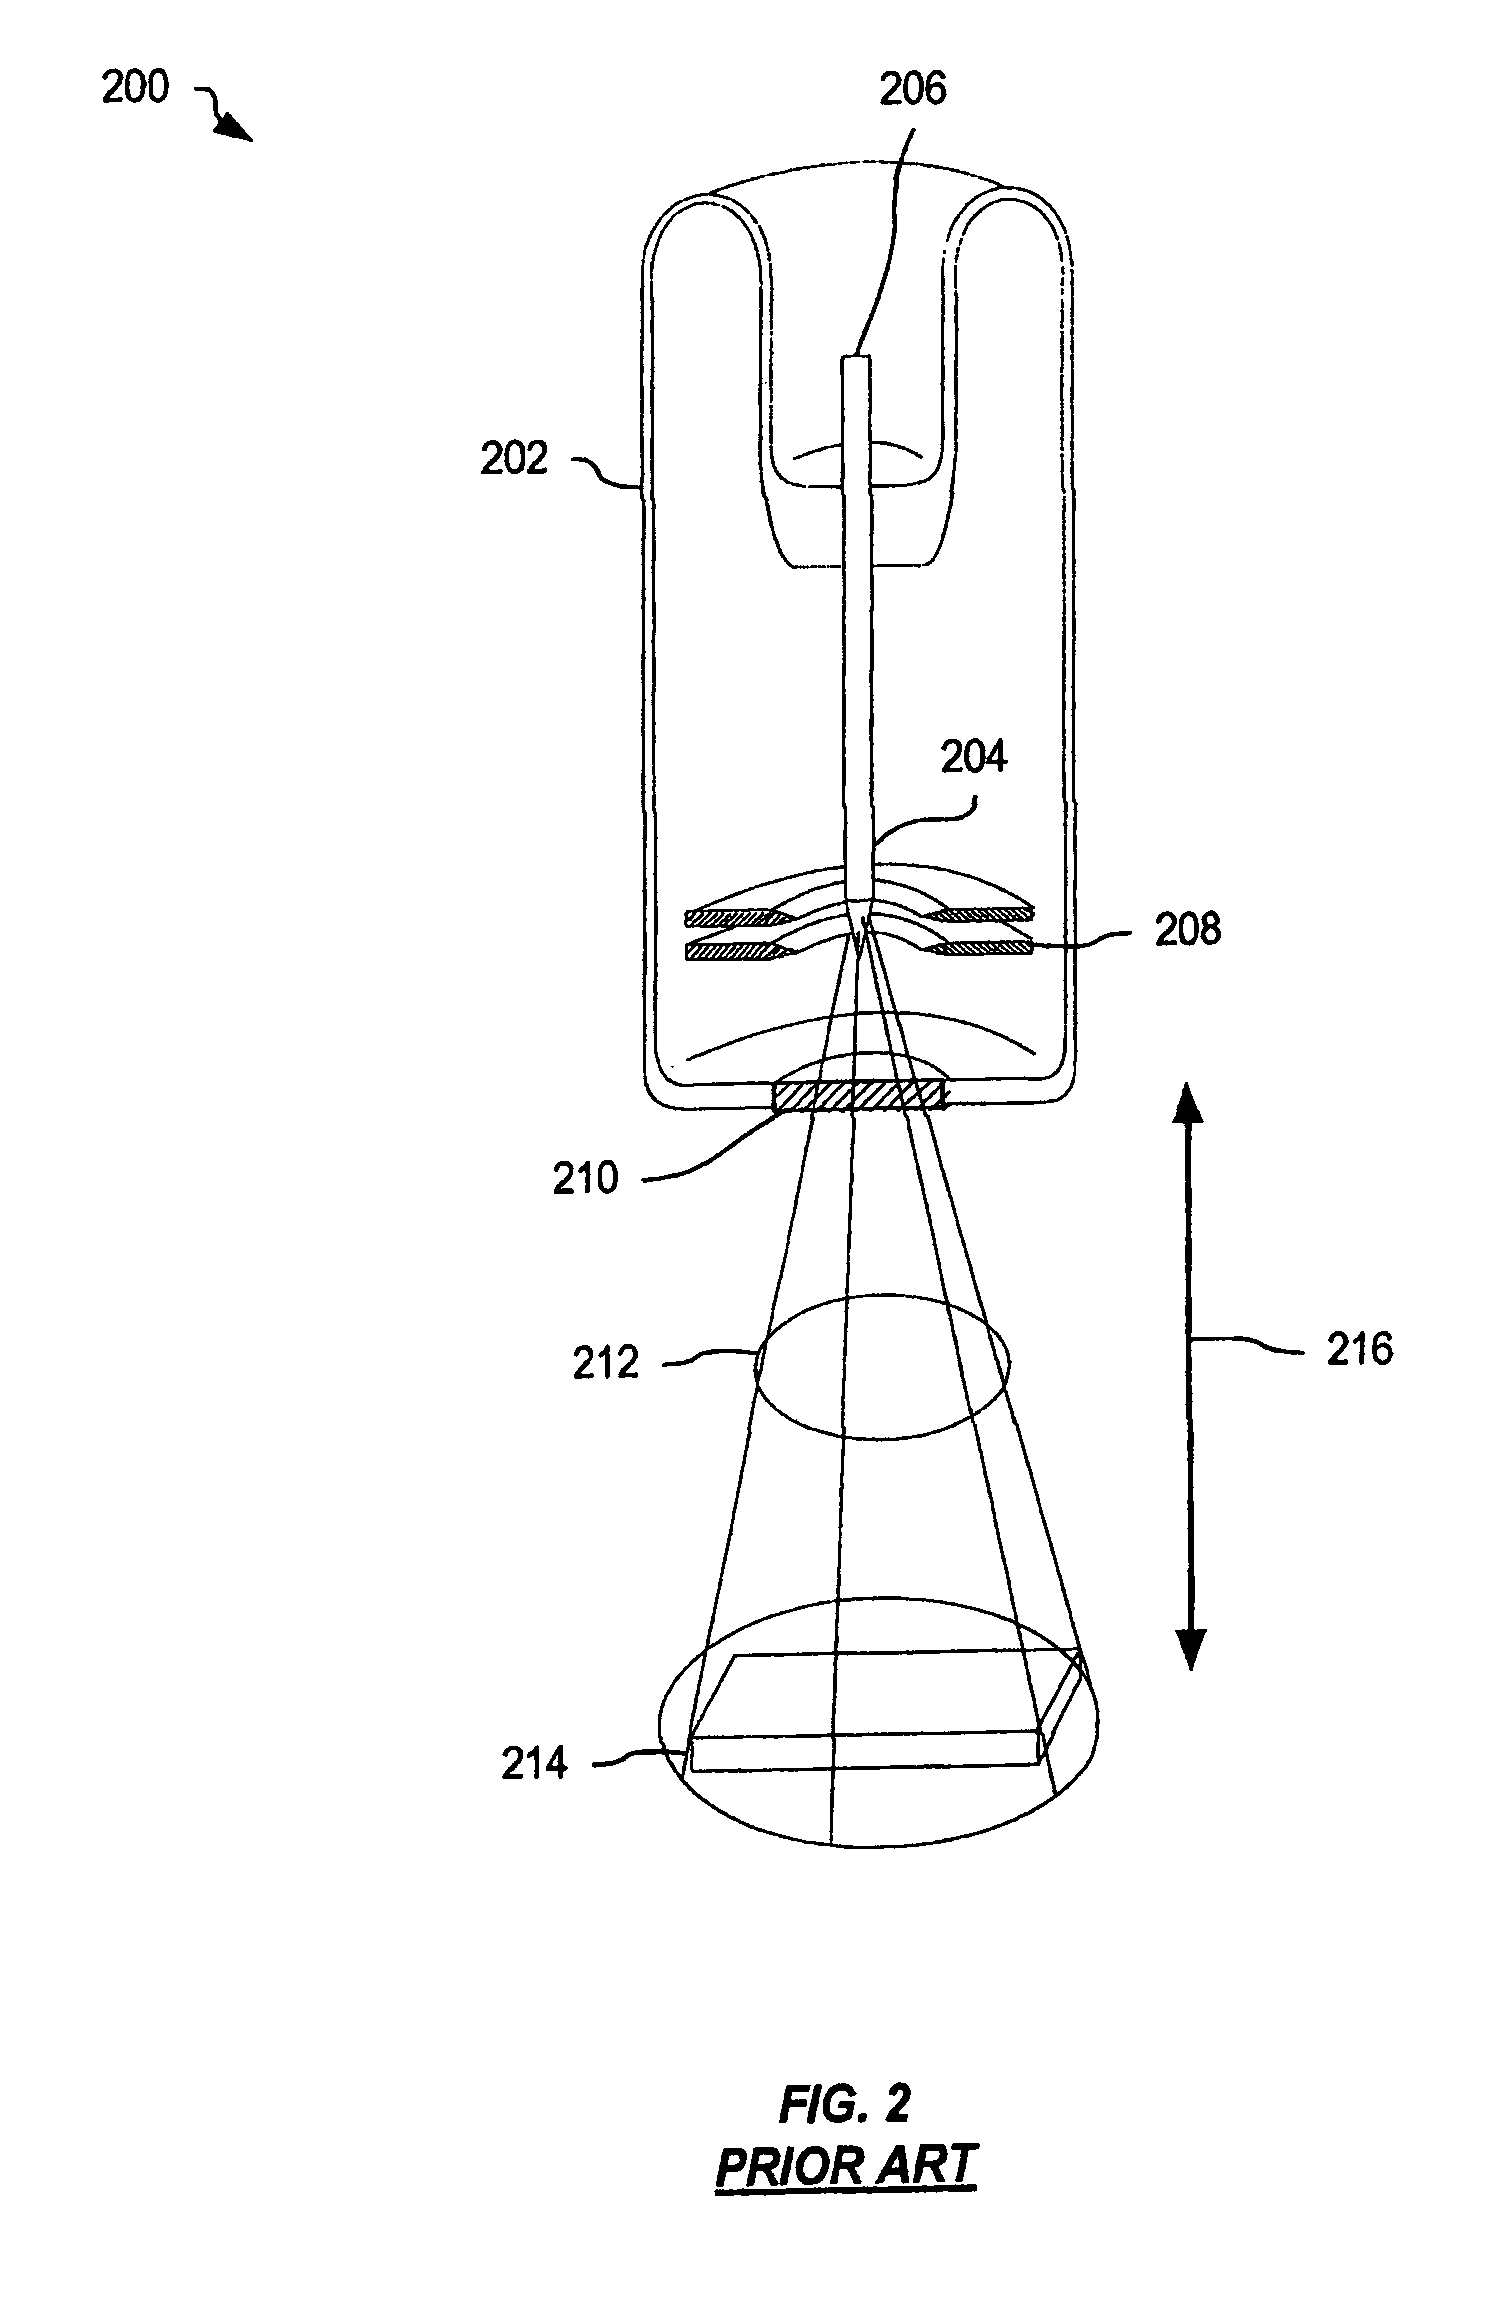 X-ray system for irradiating material used in transfusions